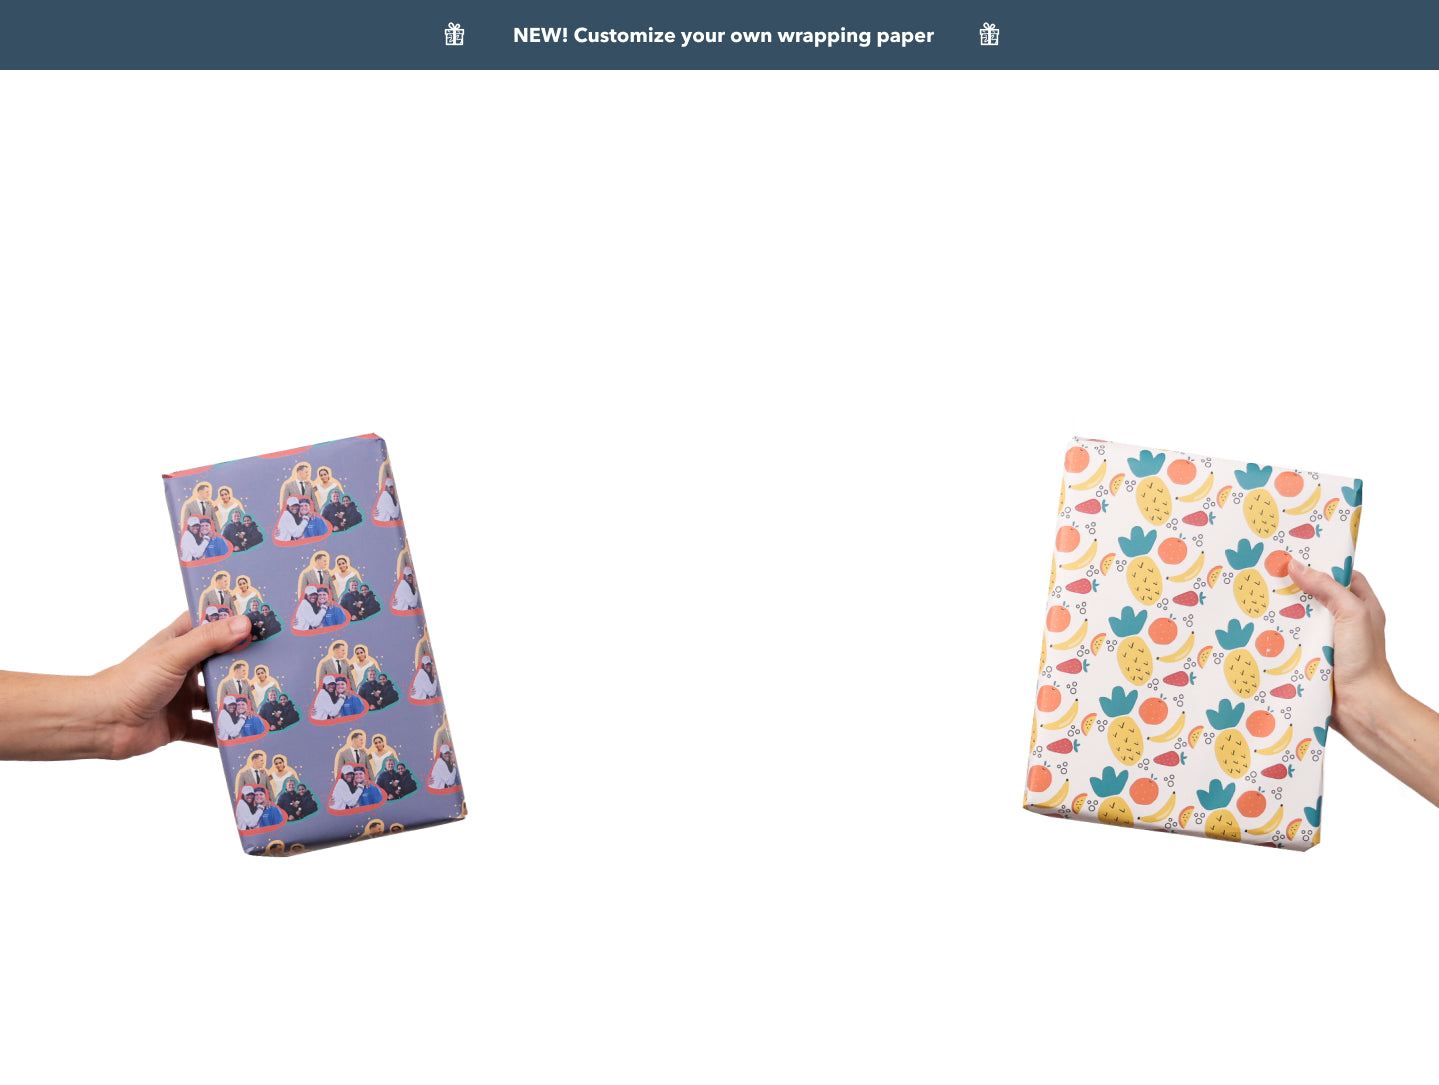 Personalized photo wrapping paper next to a personalized wrapping paper with fruit